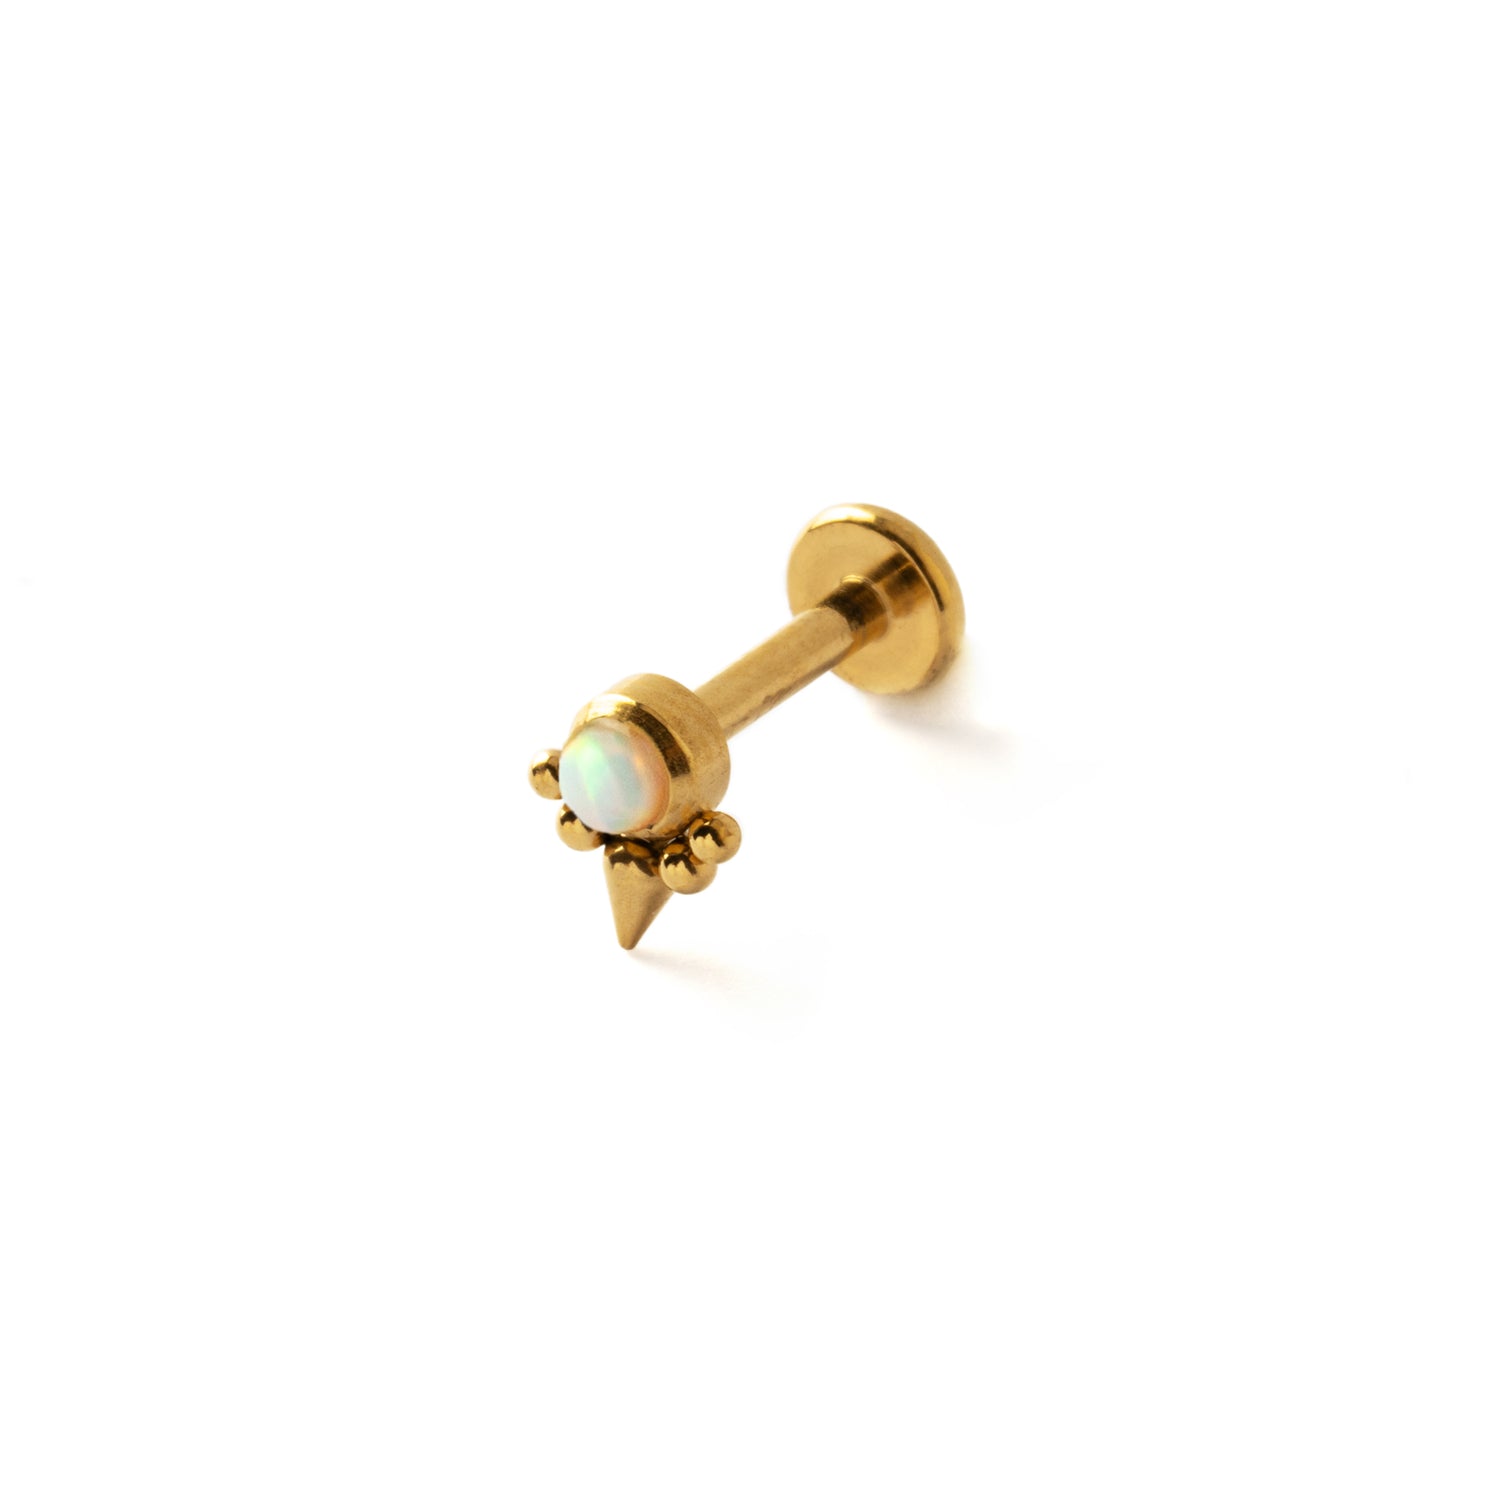 Elvira Gold surgical steel internally threaded Labret with White Opal right side view